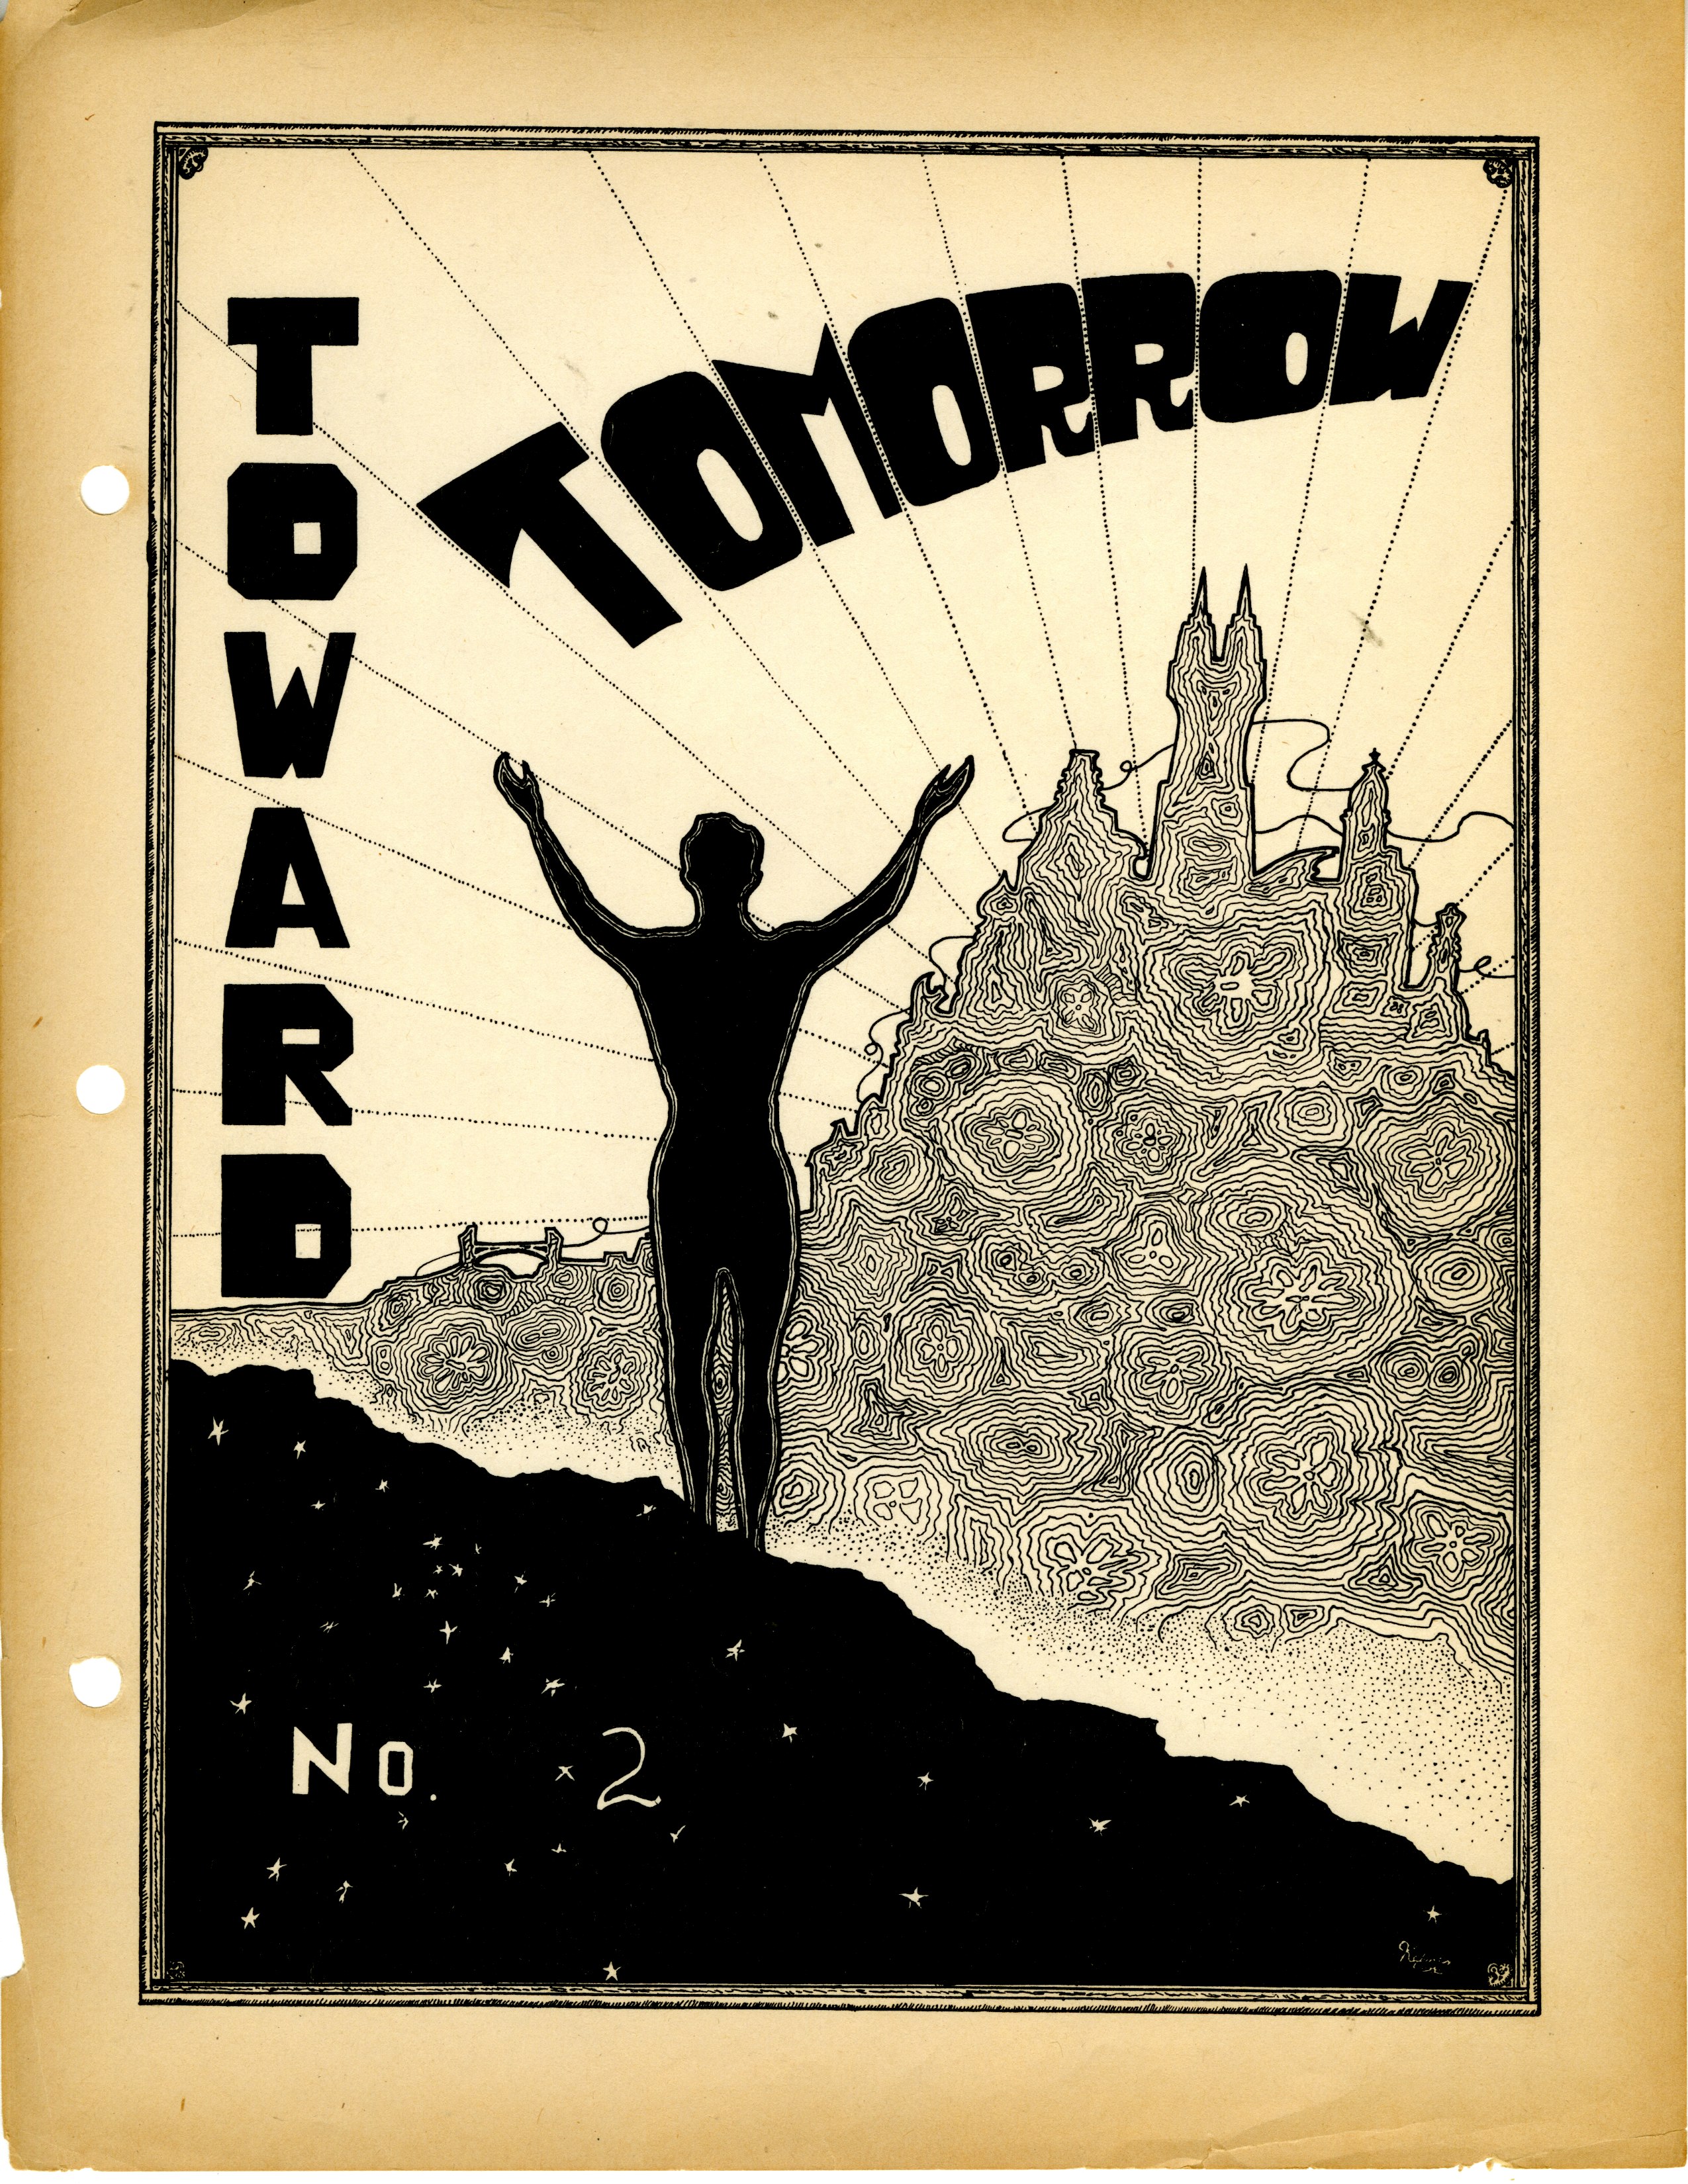 Cover of "Toward Tomorrow no. 2," June 1944, Jim Kepner. Courtesy of ONE Archives at the USC Libraries.